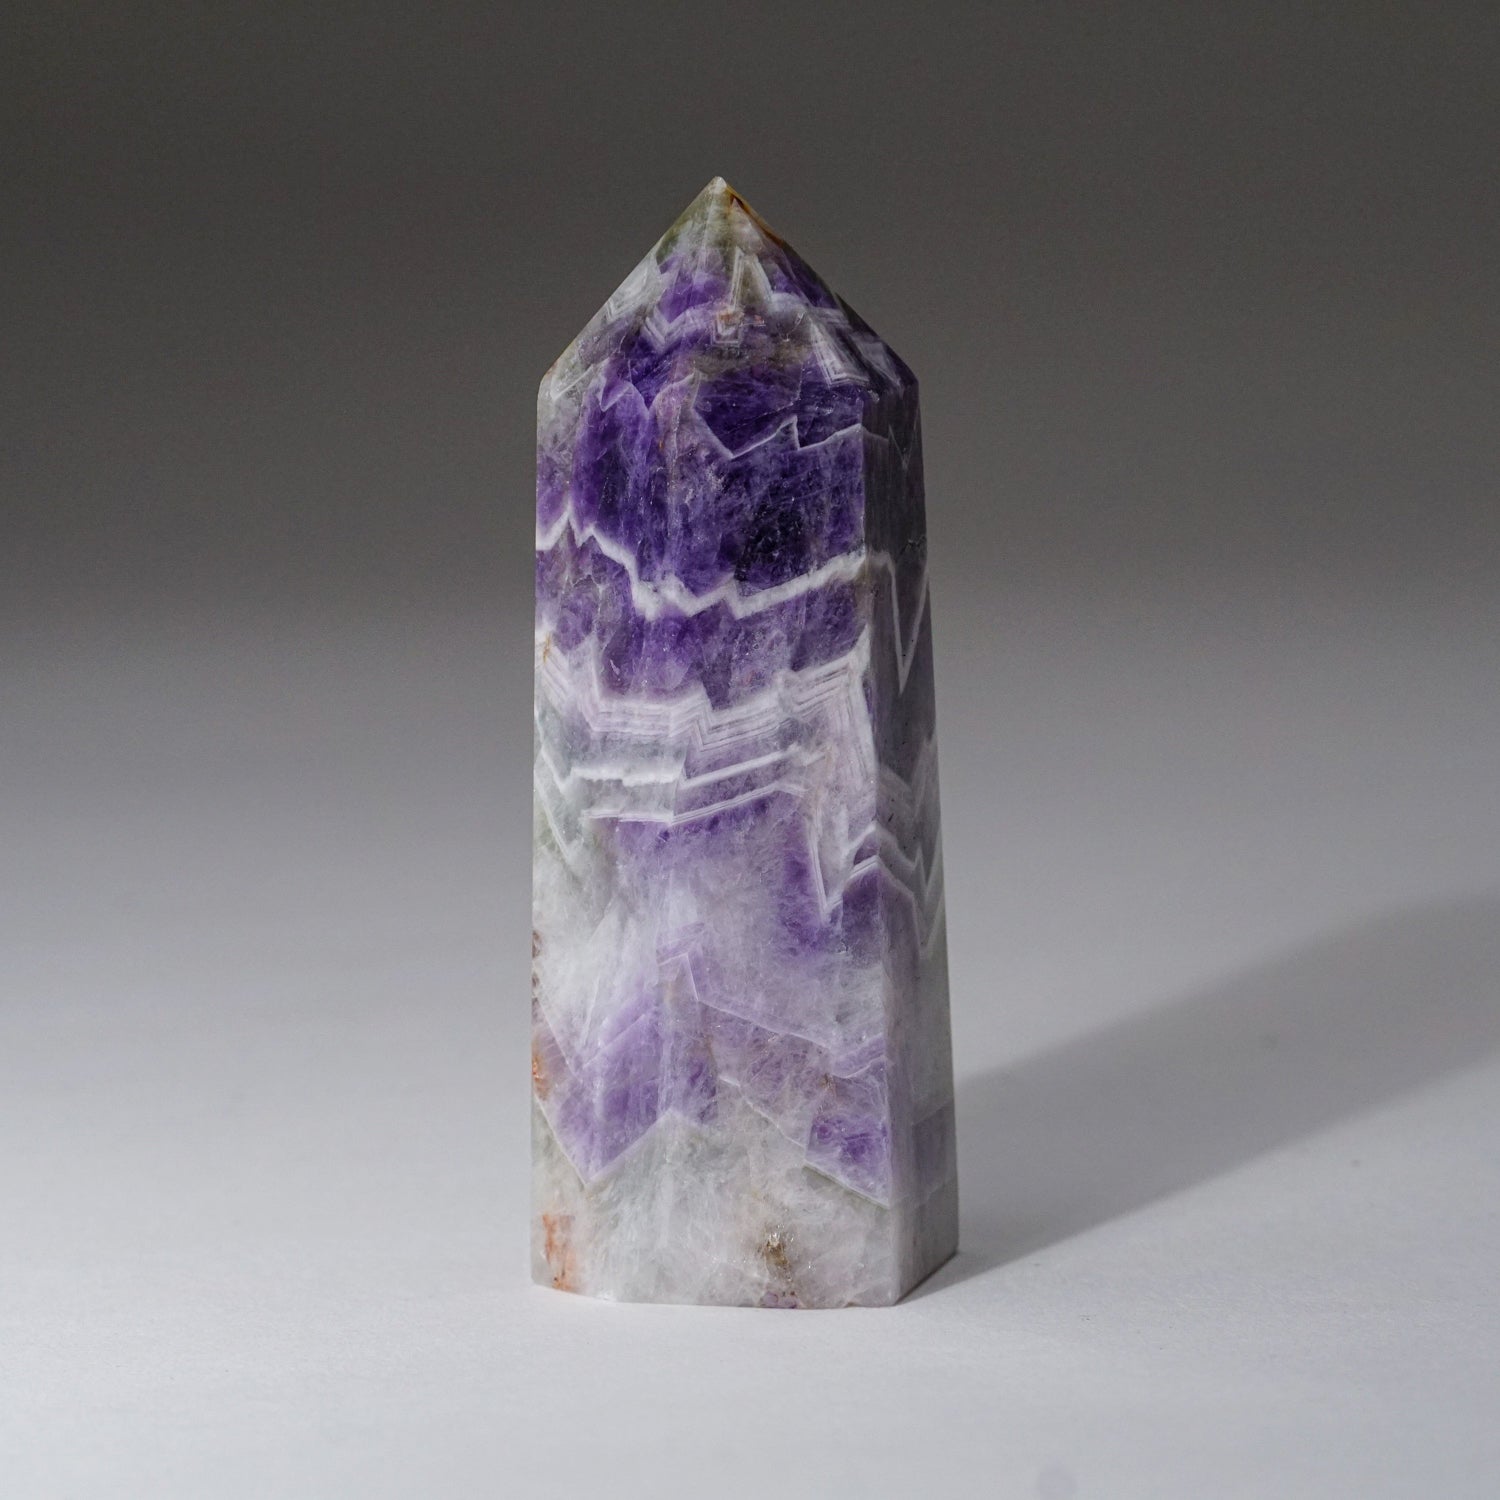 Polished Chevron Amethyst Point from Brazil (151 grams)